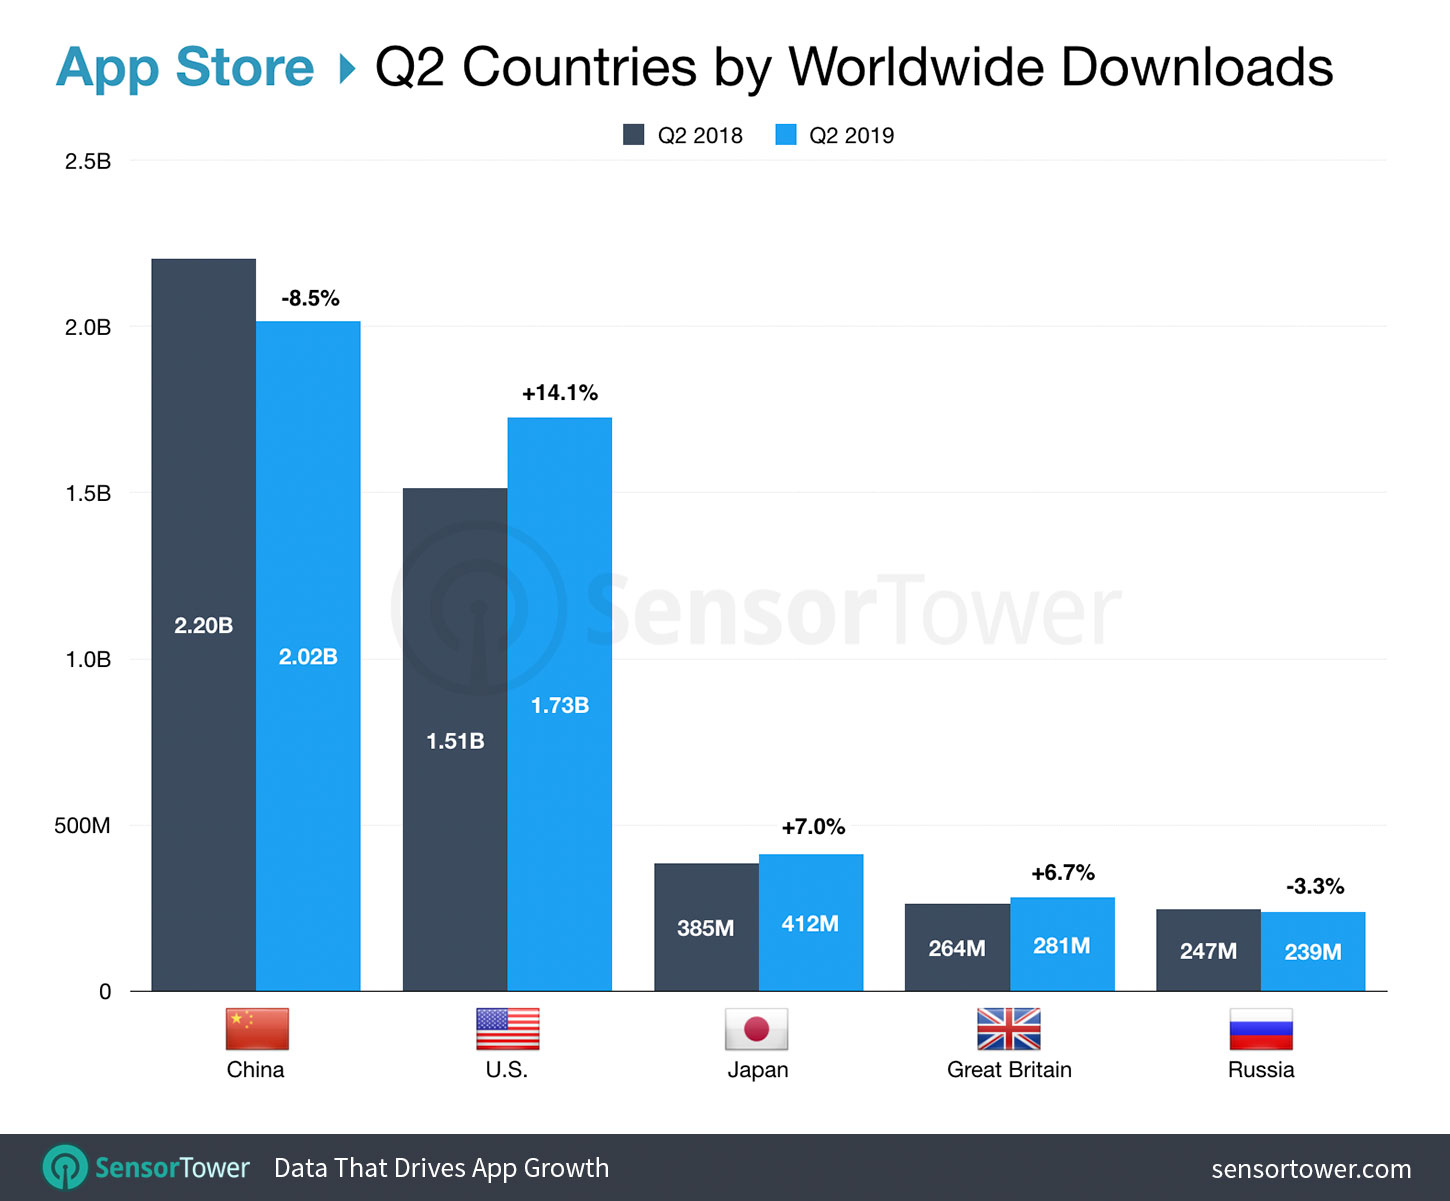 Top Countries Worldwide for Q2 2019 by App Downloads